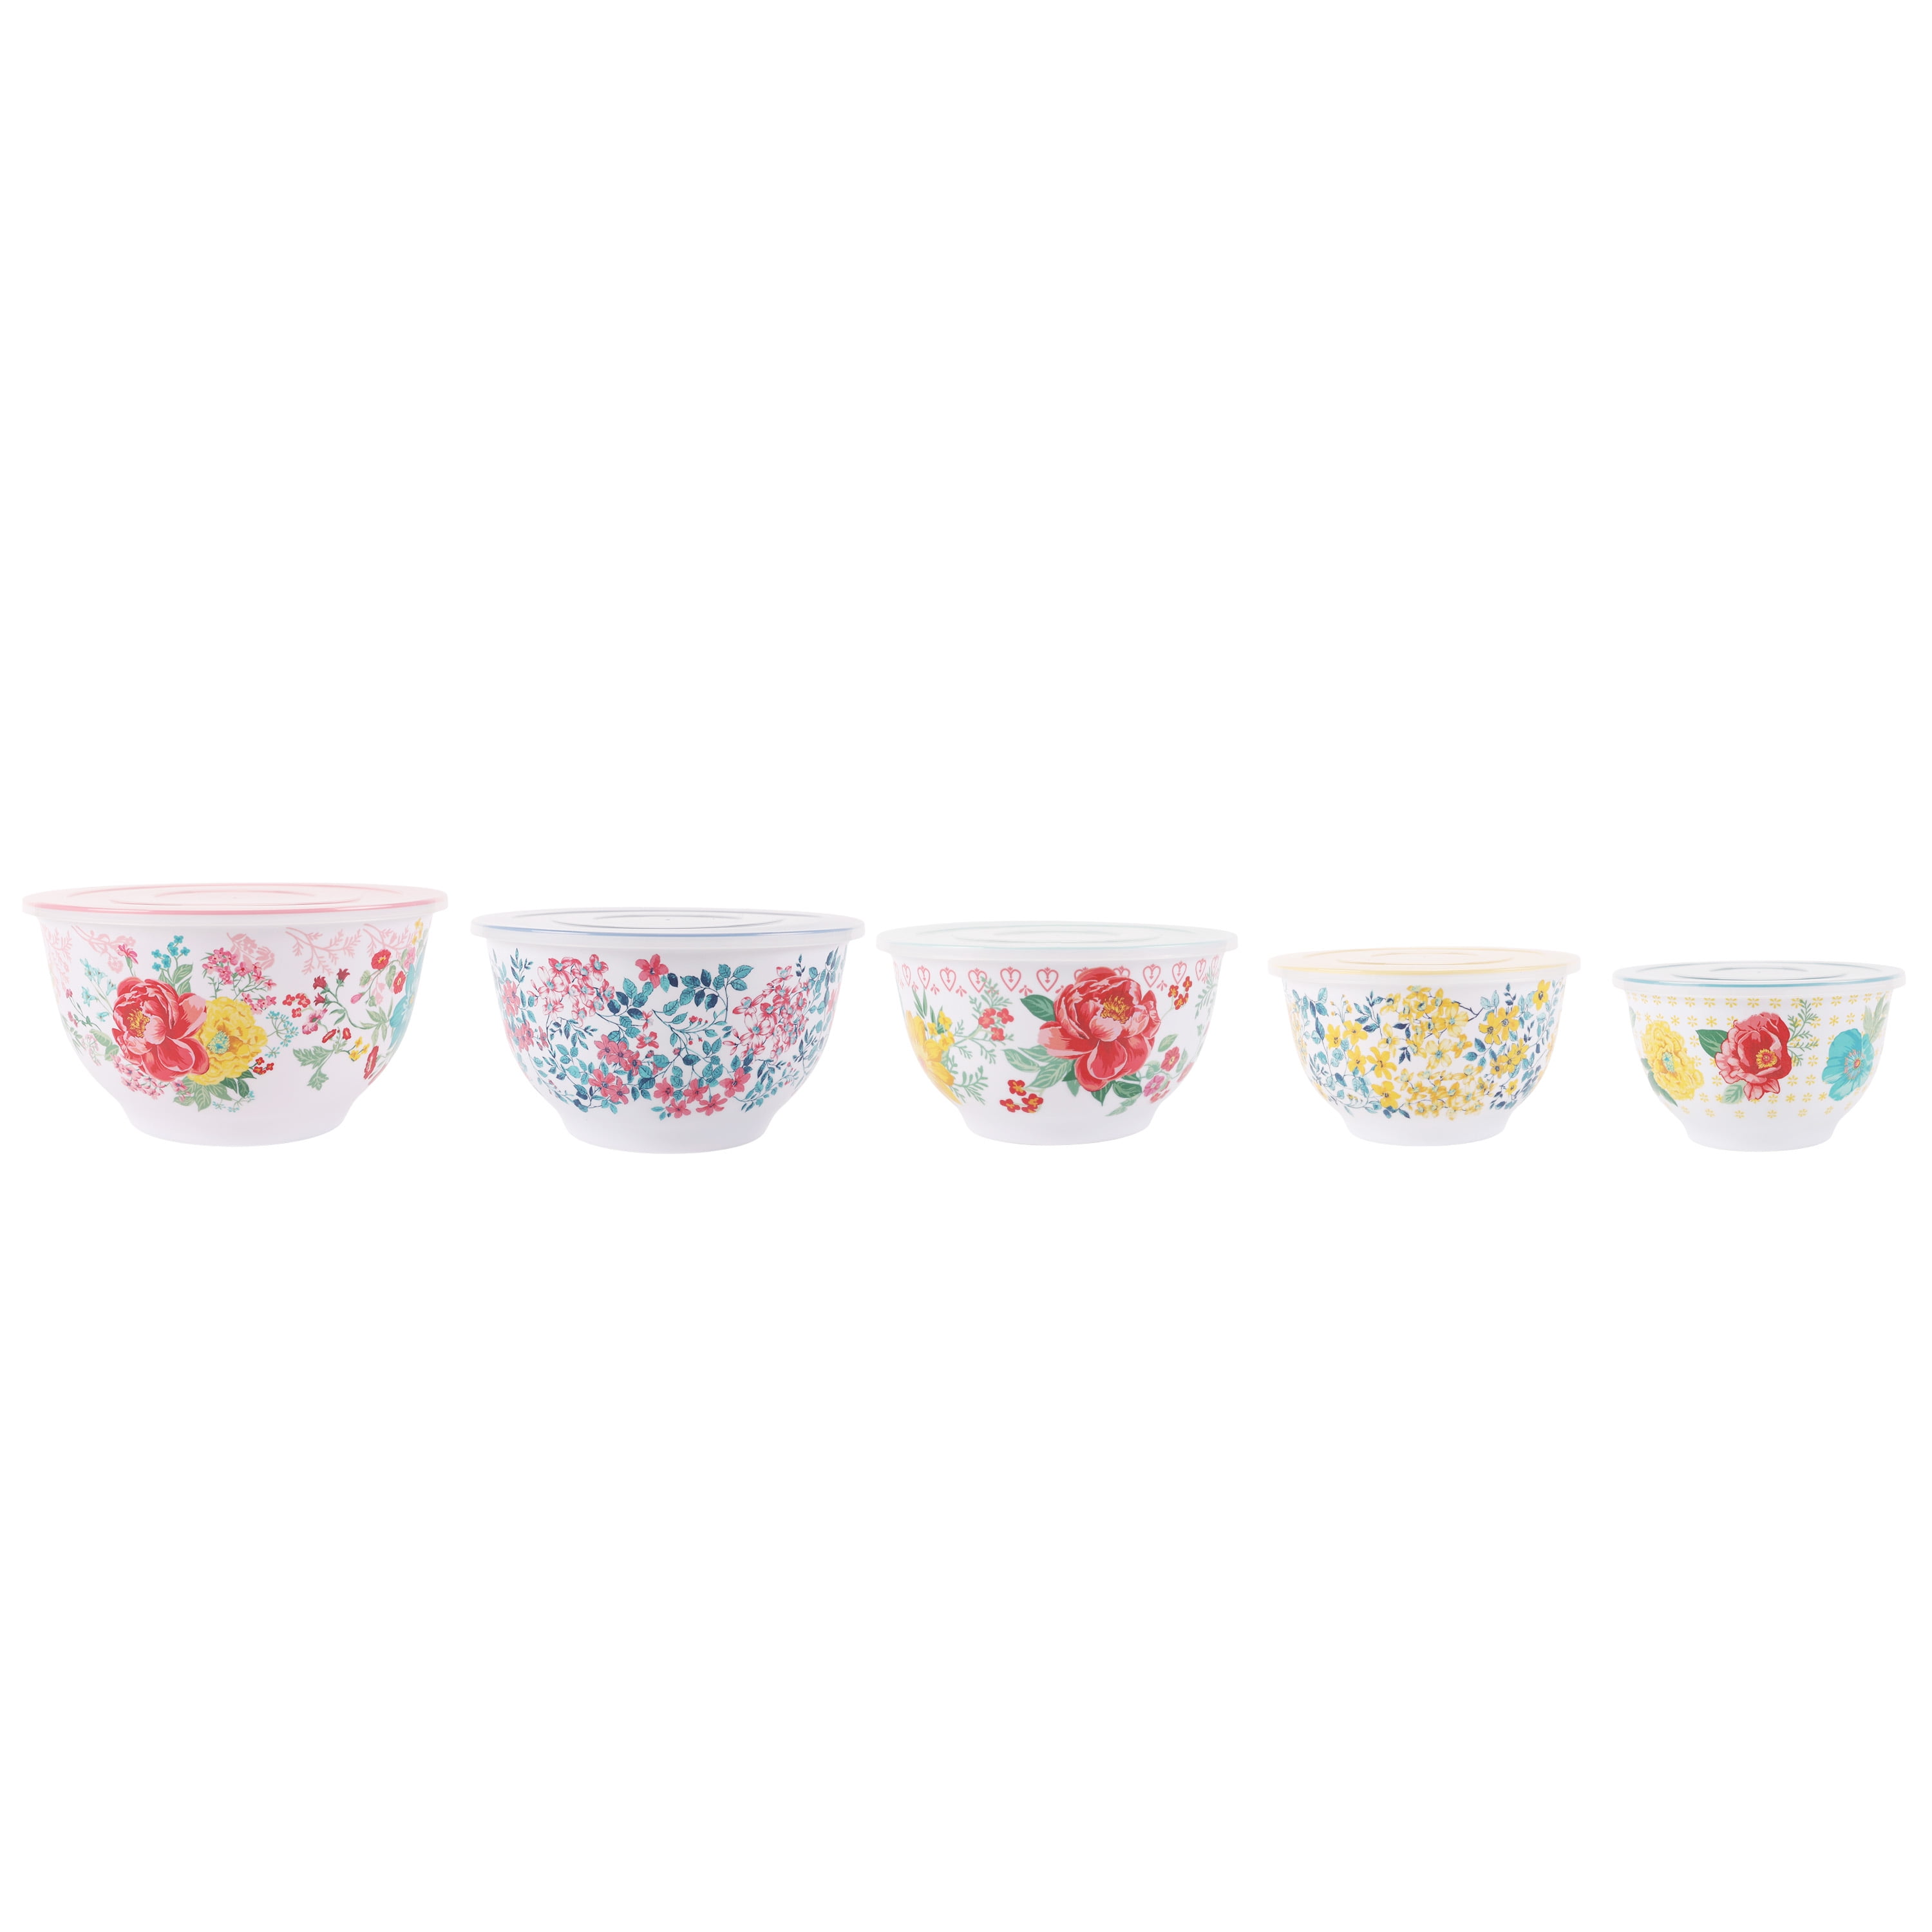 The Pioneer Woman Merry Meadows 10-Piece Melamine Mixing Bowl Set with Lids, Size: XL Bowl with Lid: 5.5 qt (5.2 Large) 10.5 in Dia (26.6 cm) Large